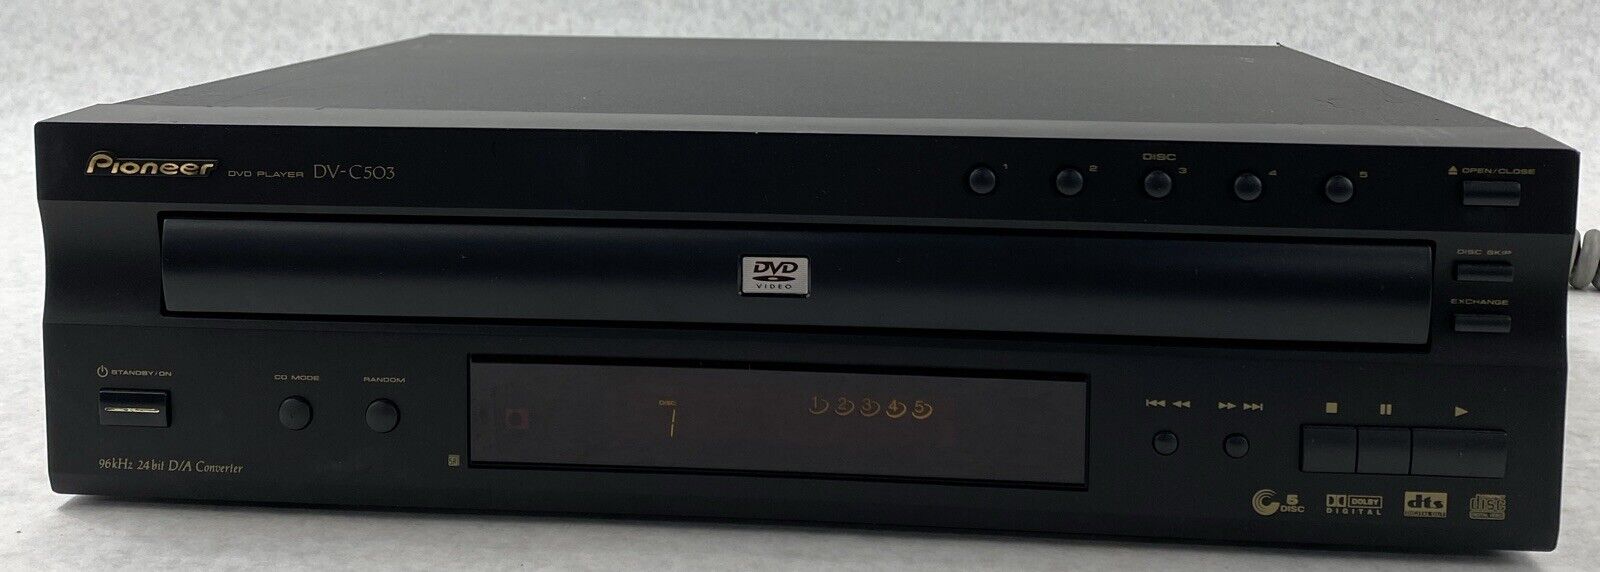 Pioneer DV-C503 5 Disc DVD CD Player S-Video Component RCA with Hasty Tray